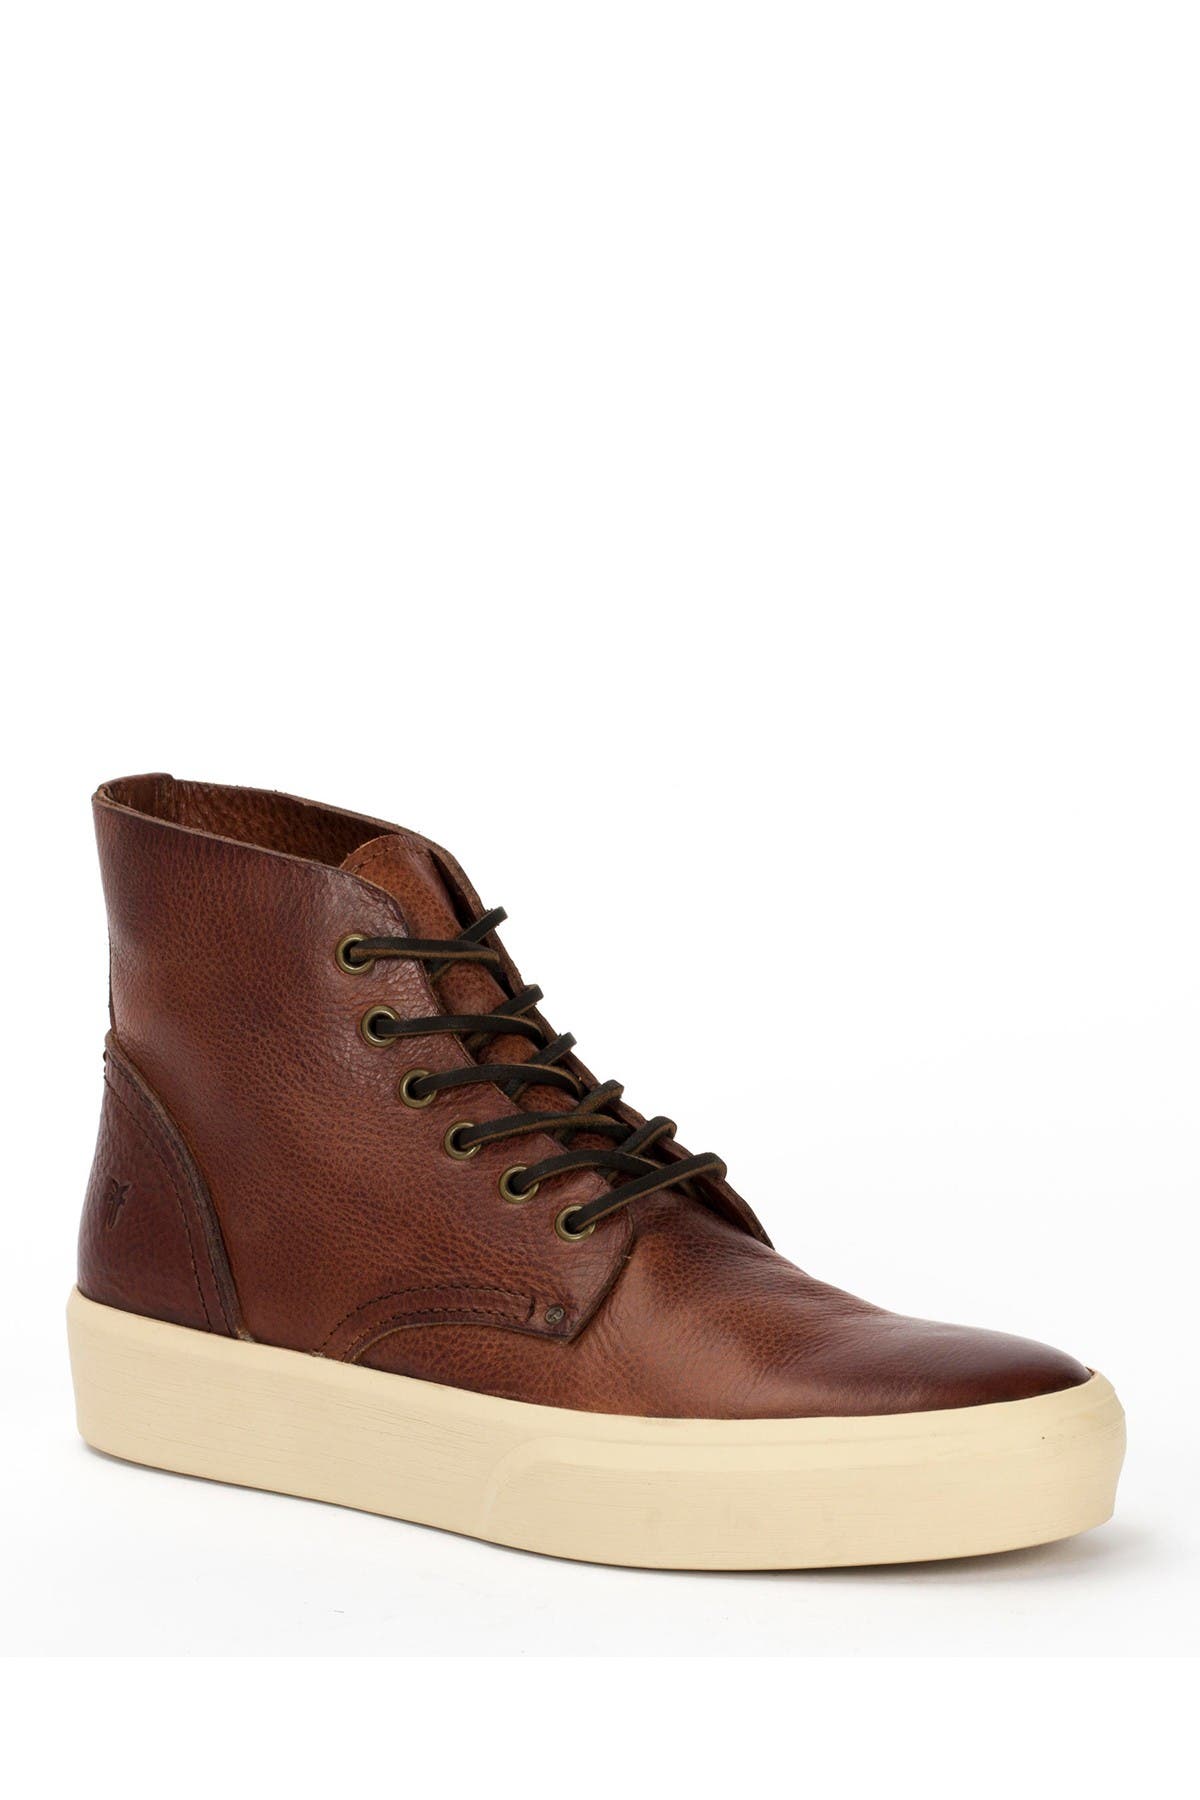 Frye | Beacon Lace-Up Shoe | Nordstrom Rack